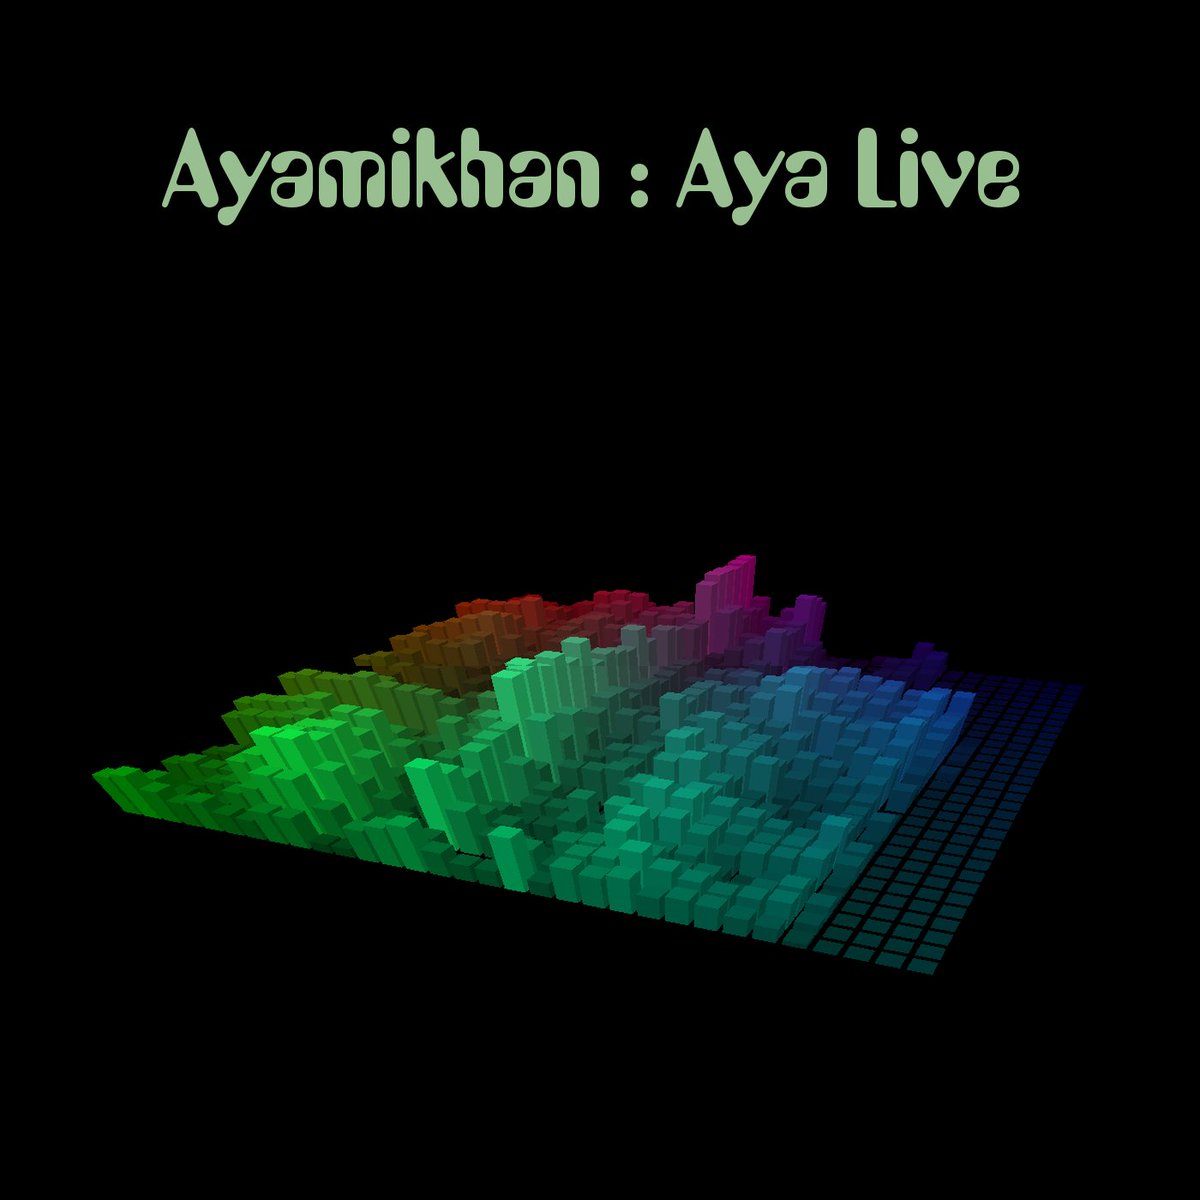 My first album, 
Aya Live, 
is now available as MP3 again, 
from Amazon Music :

music.amazon.co.uk/albums/B08NXTN…
amazon.com/Aya-Live-Ayami…

@AmazonMusic
@AmazonMusicJP
@AmazonMusicDE
@AmazonMusicMX
@AmazonMusicUK

#modularsynthesis 
#stochasticmusic